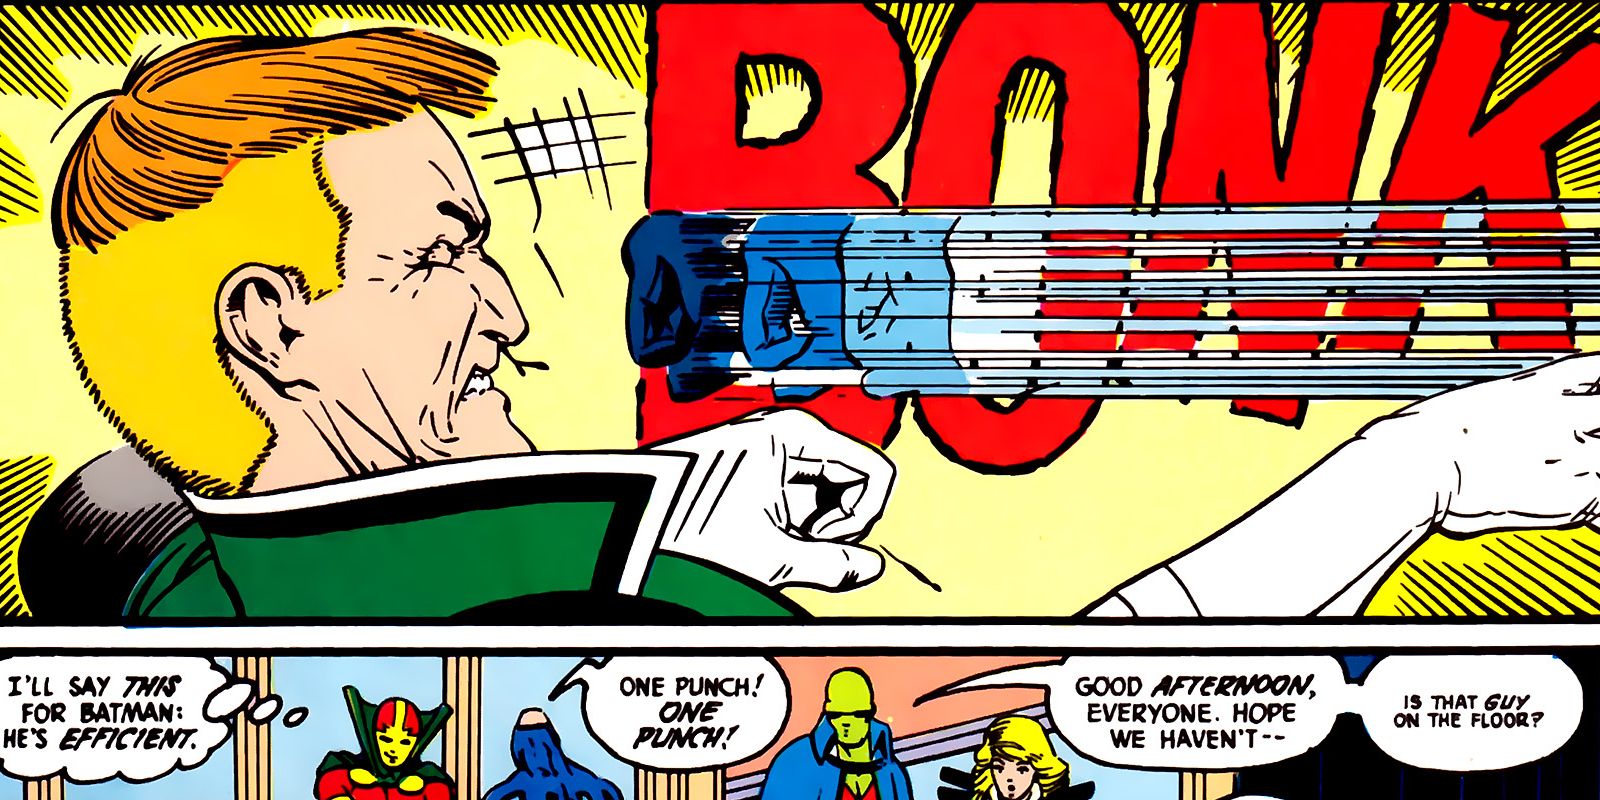 Batman wallops Guy Gardner and lays him out flat with a single punch. The rest of DC's JLI laughs in the background.